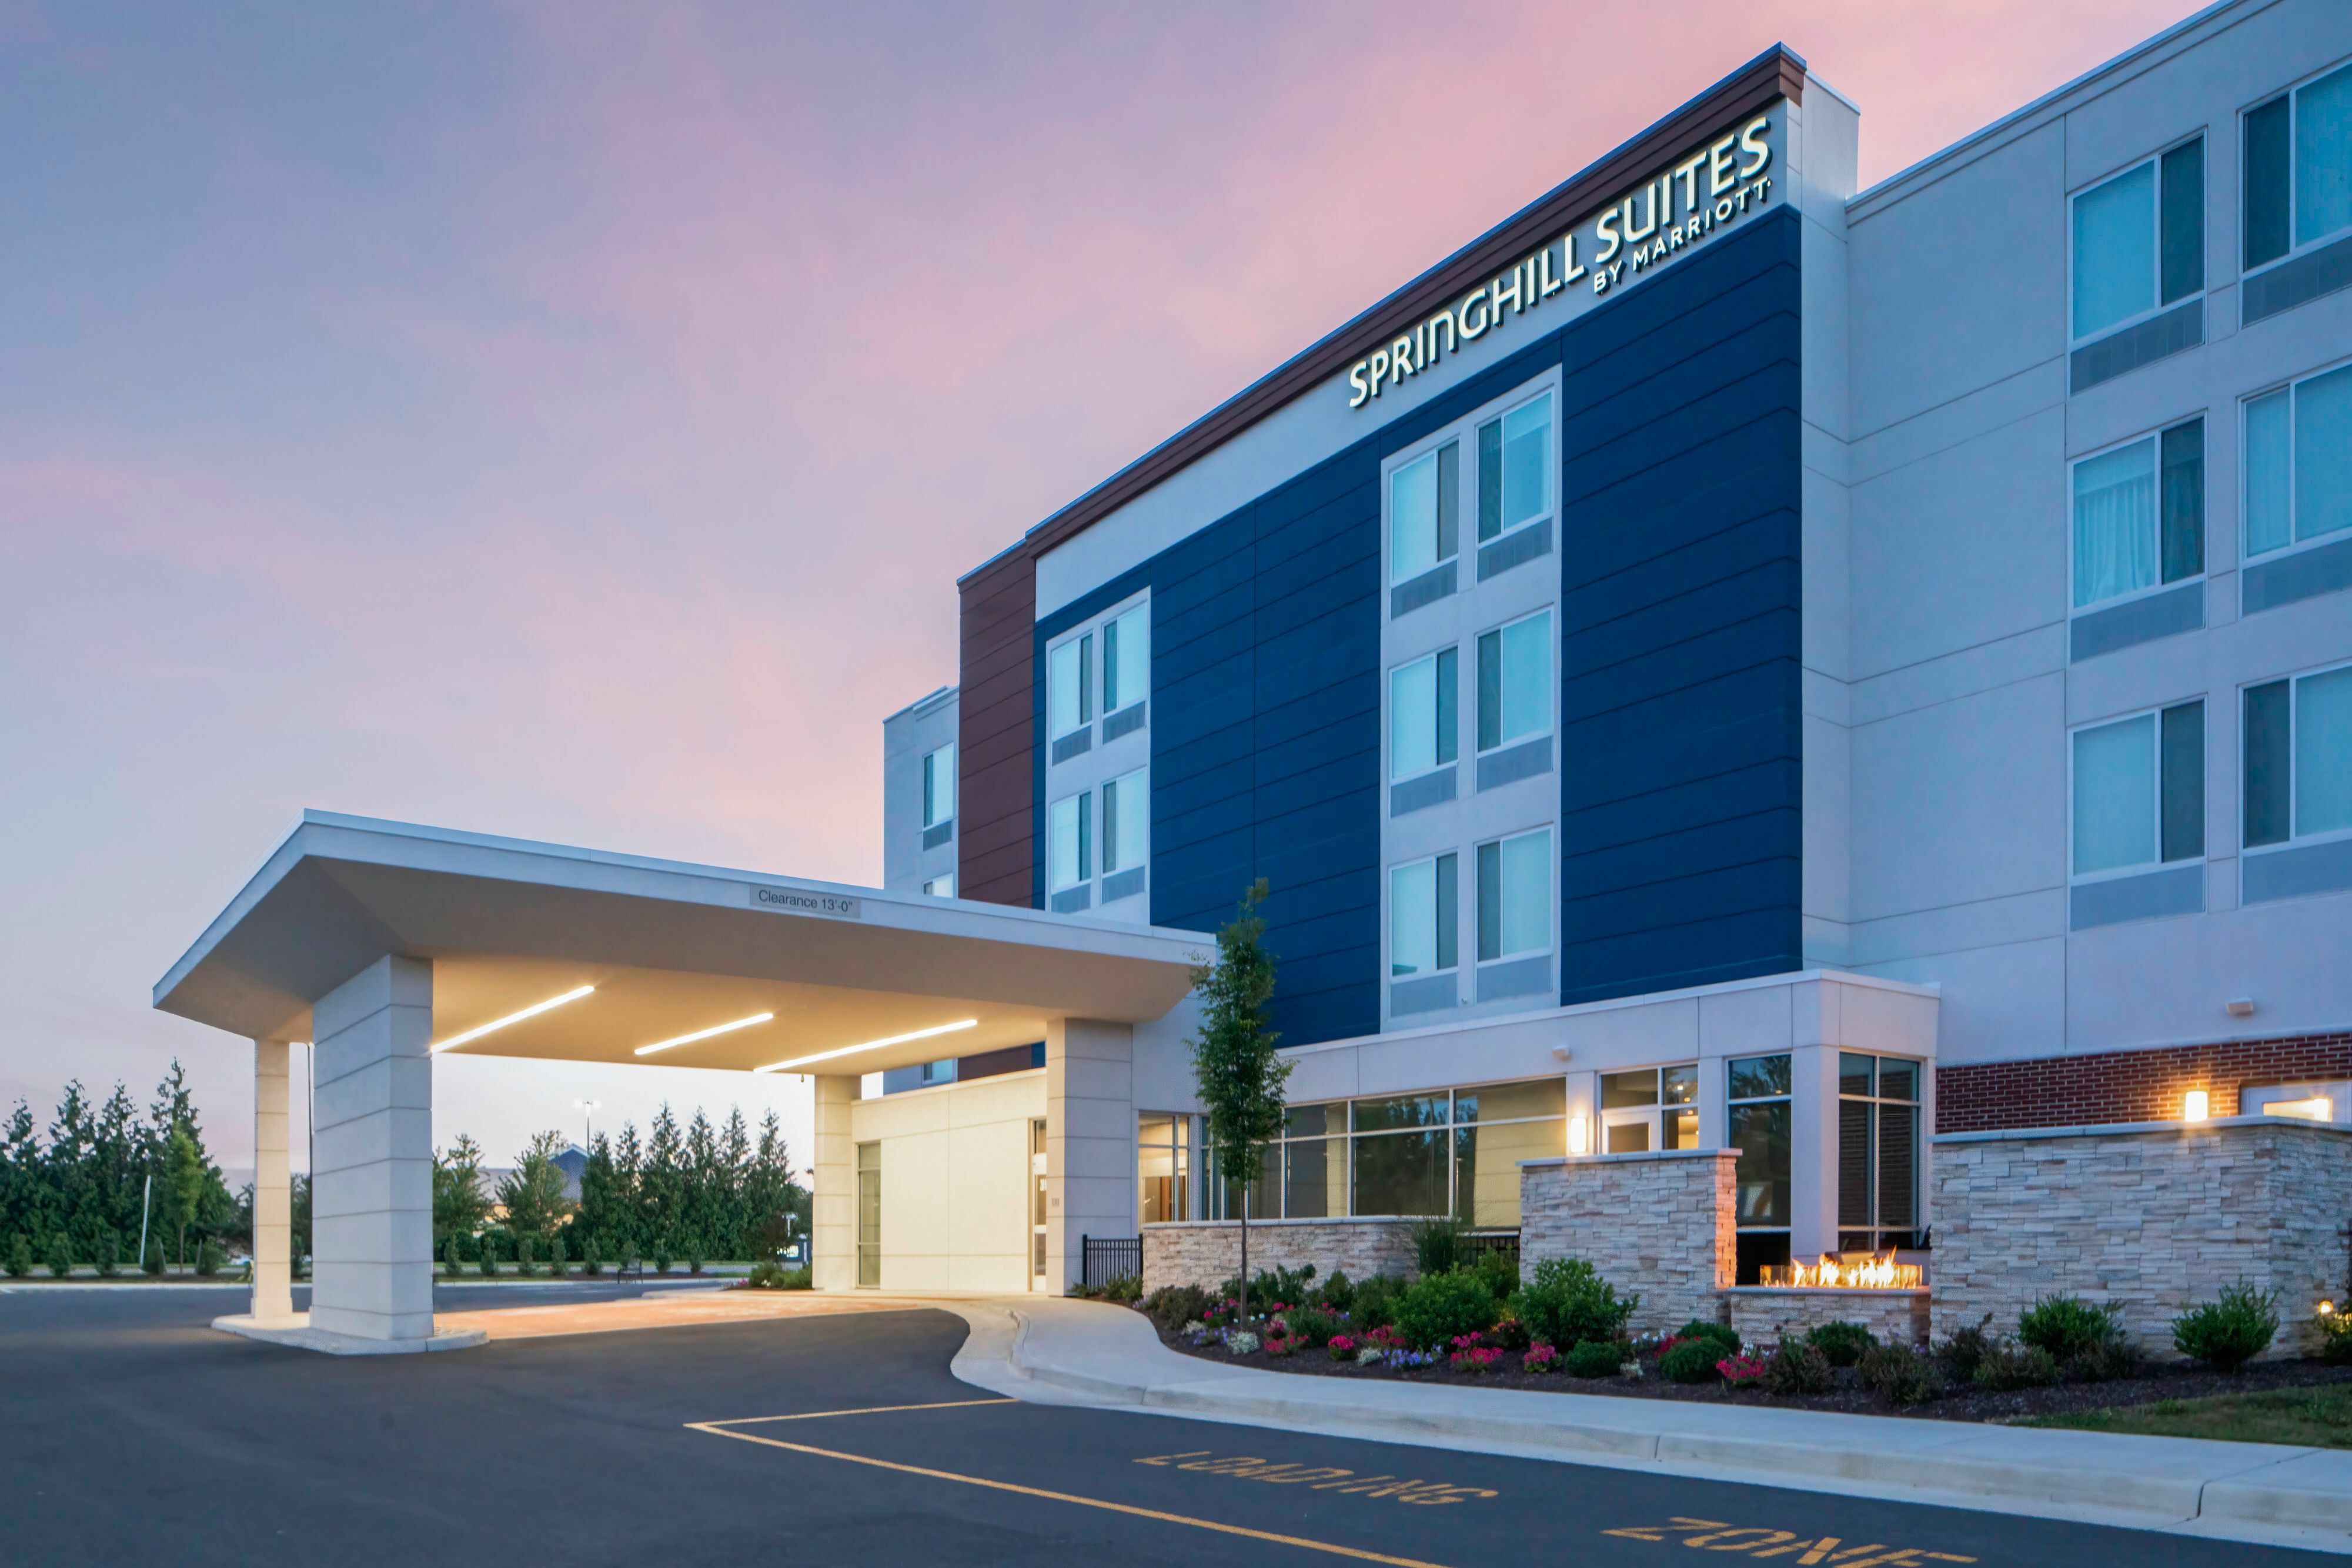 Photo of SpringHill Suites by Marriott Winchester, Winchester, VA